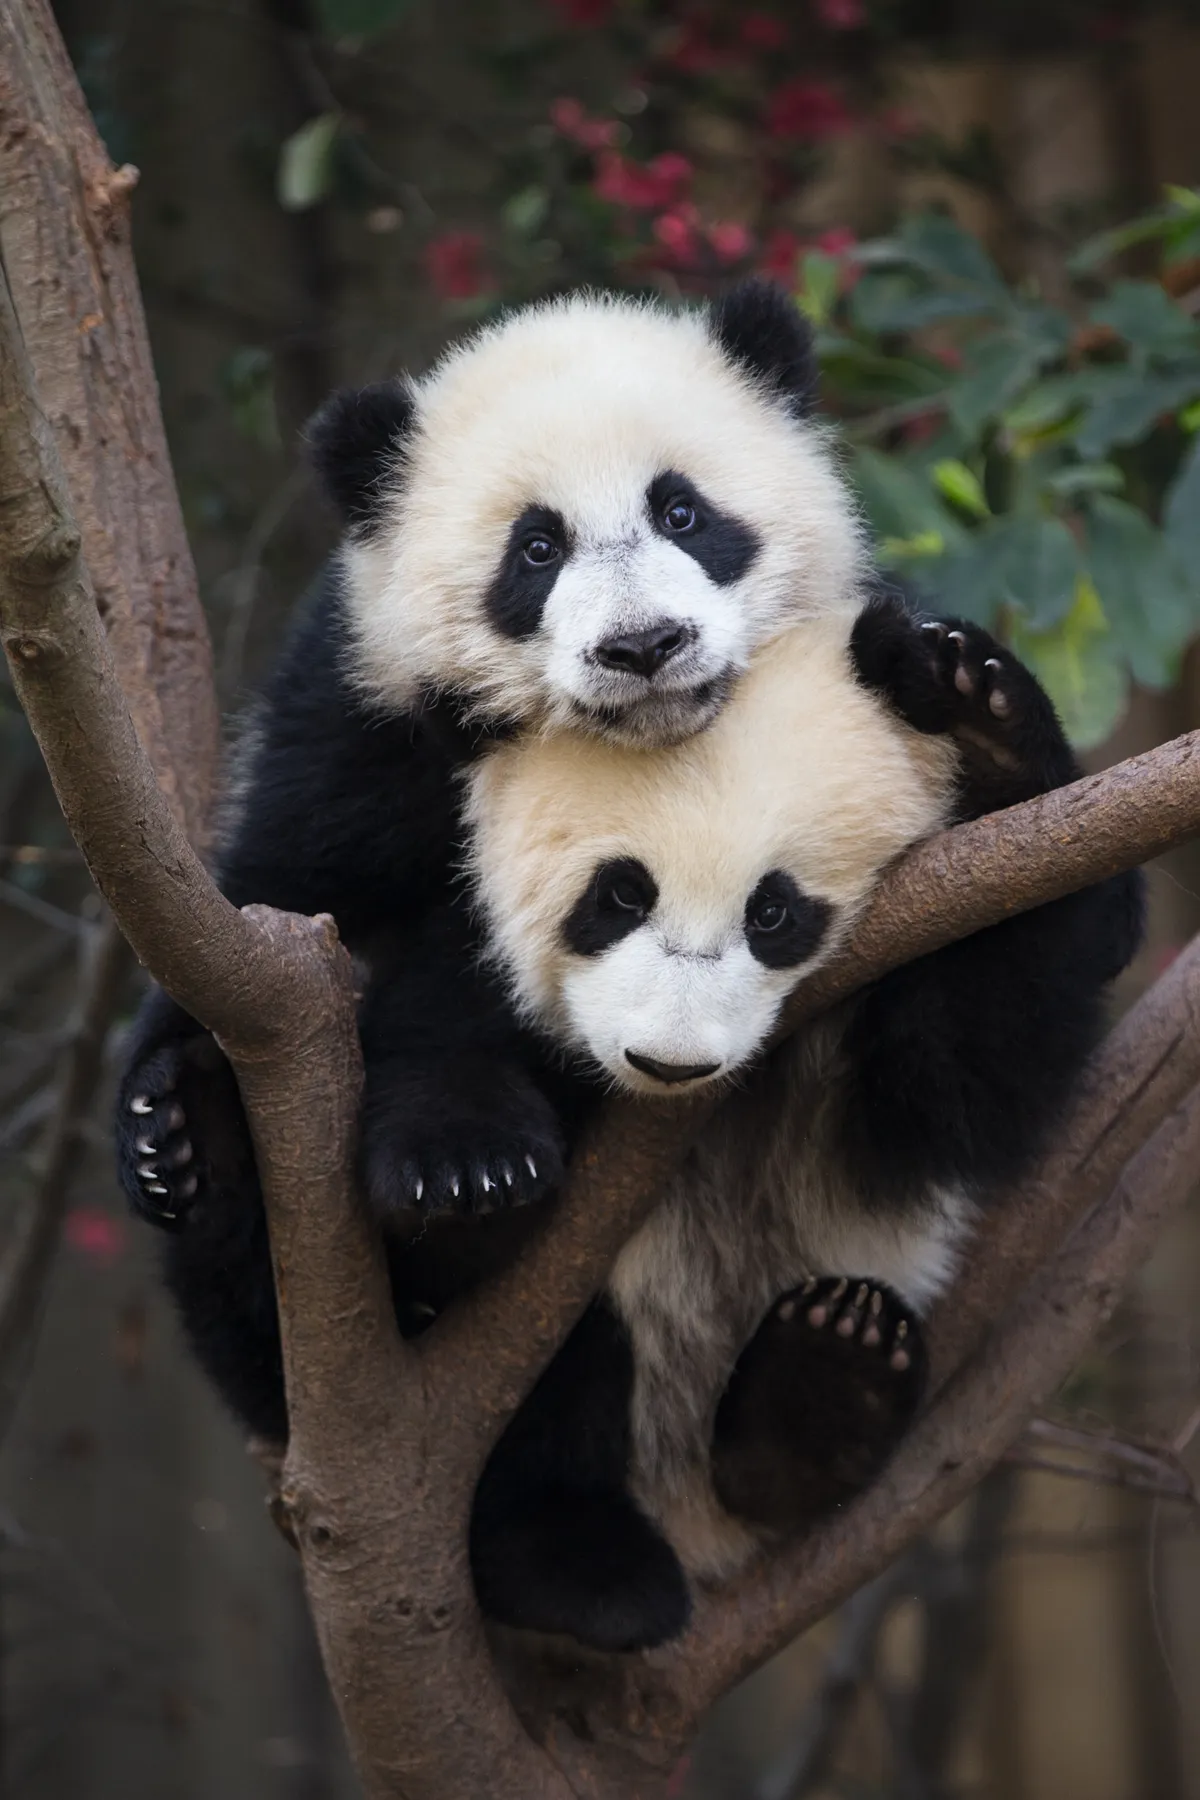 Fifty per cent of panda births result in twins but usually in the wild only one cub survives. © Suzi Eszterhas